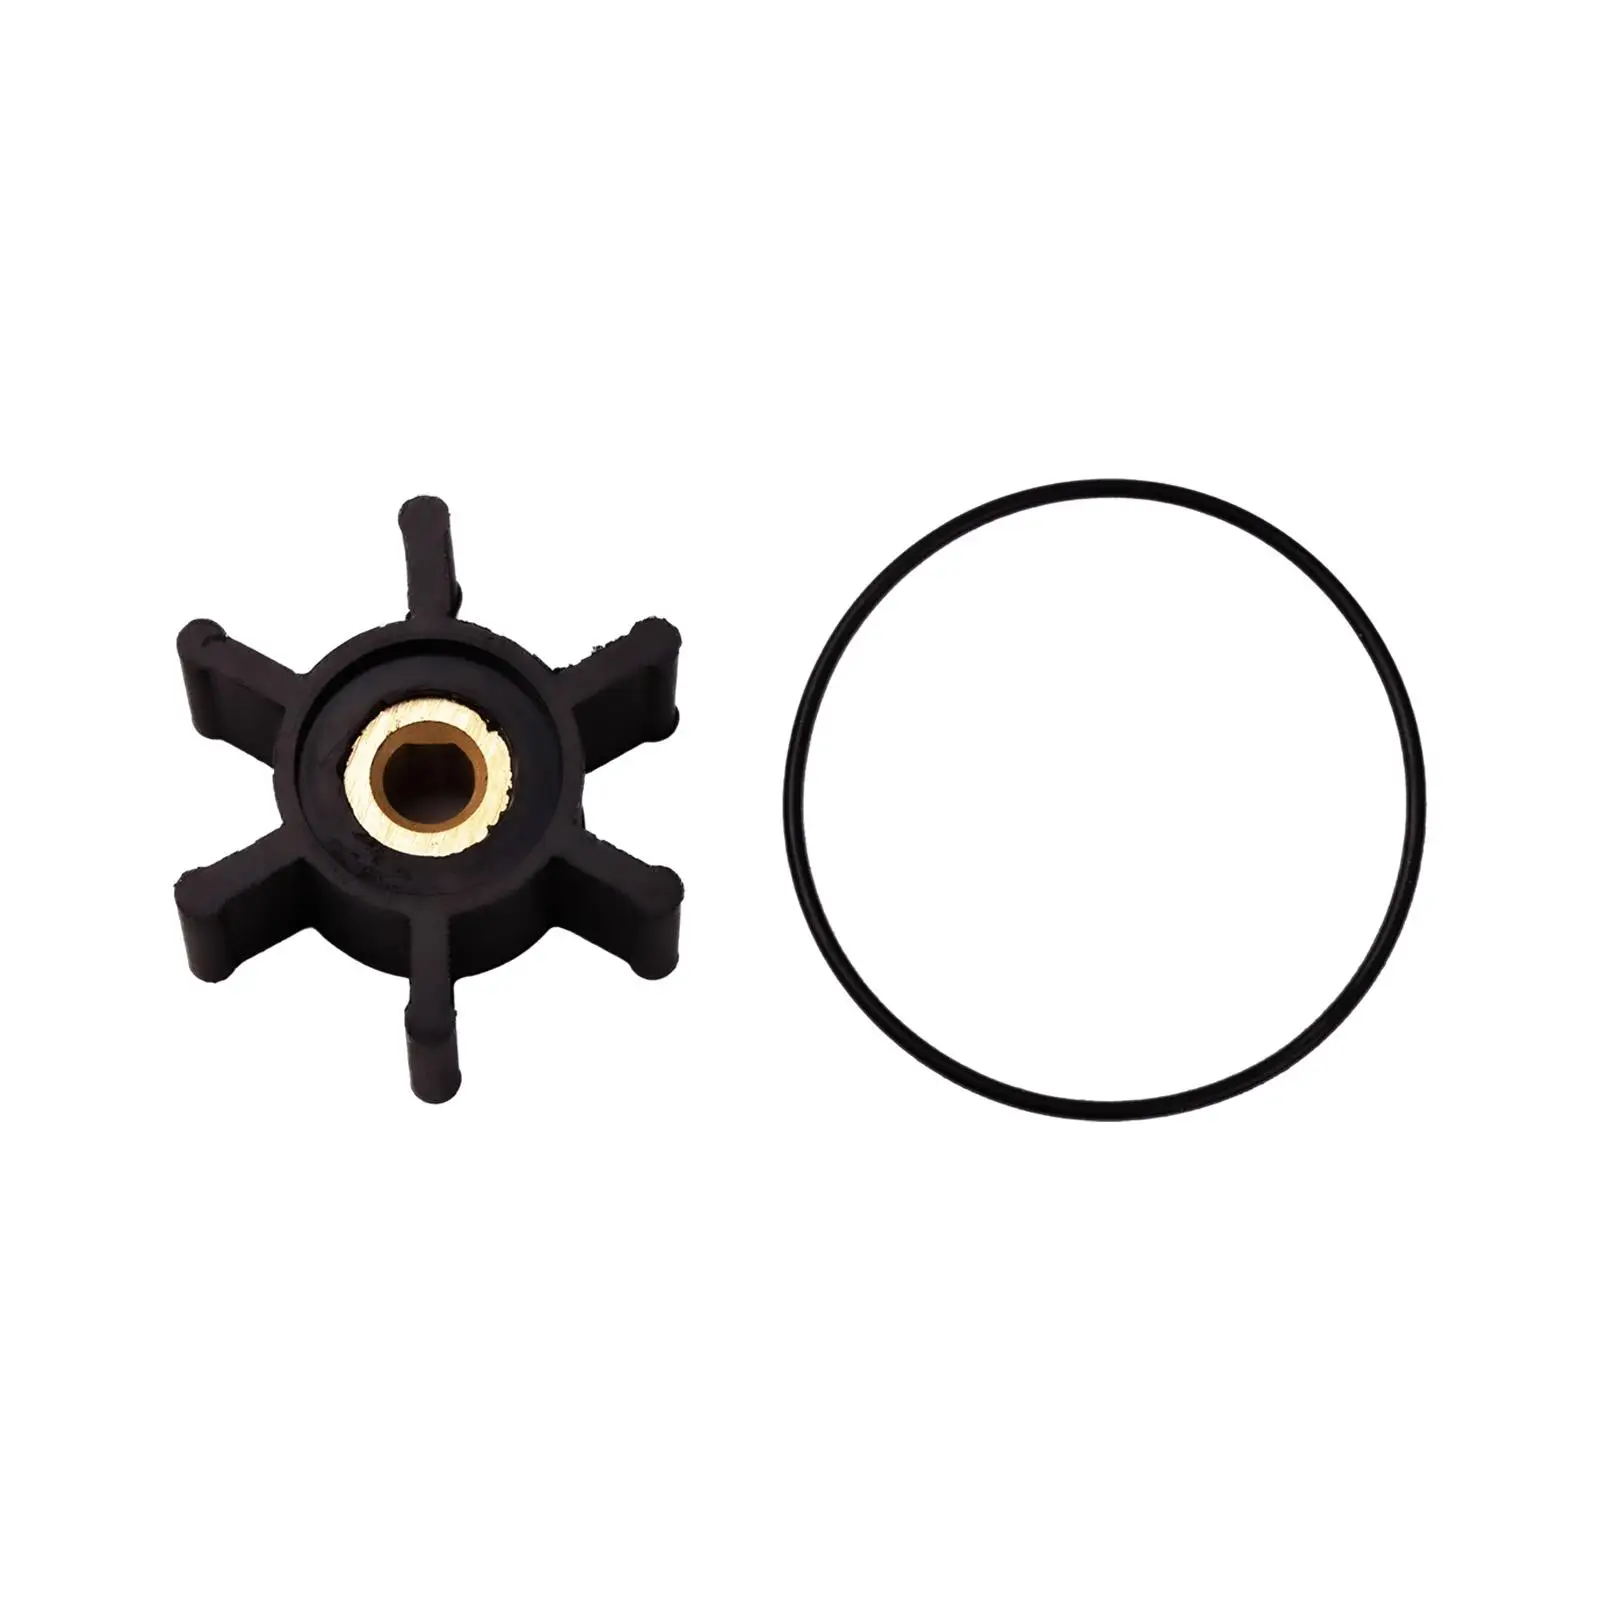 49-16-2771 Impeller with O Ring Kit Black Impeller with O Ring for Milwaukee M18 Transfer Pumps Easy Installation Durable